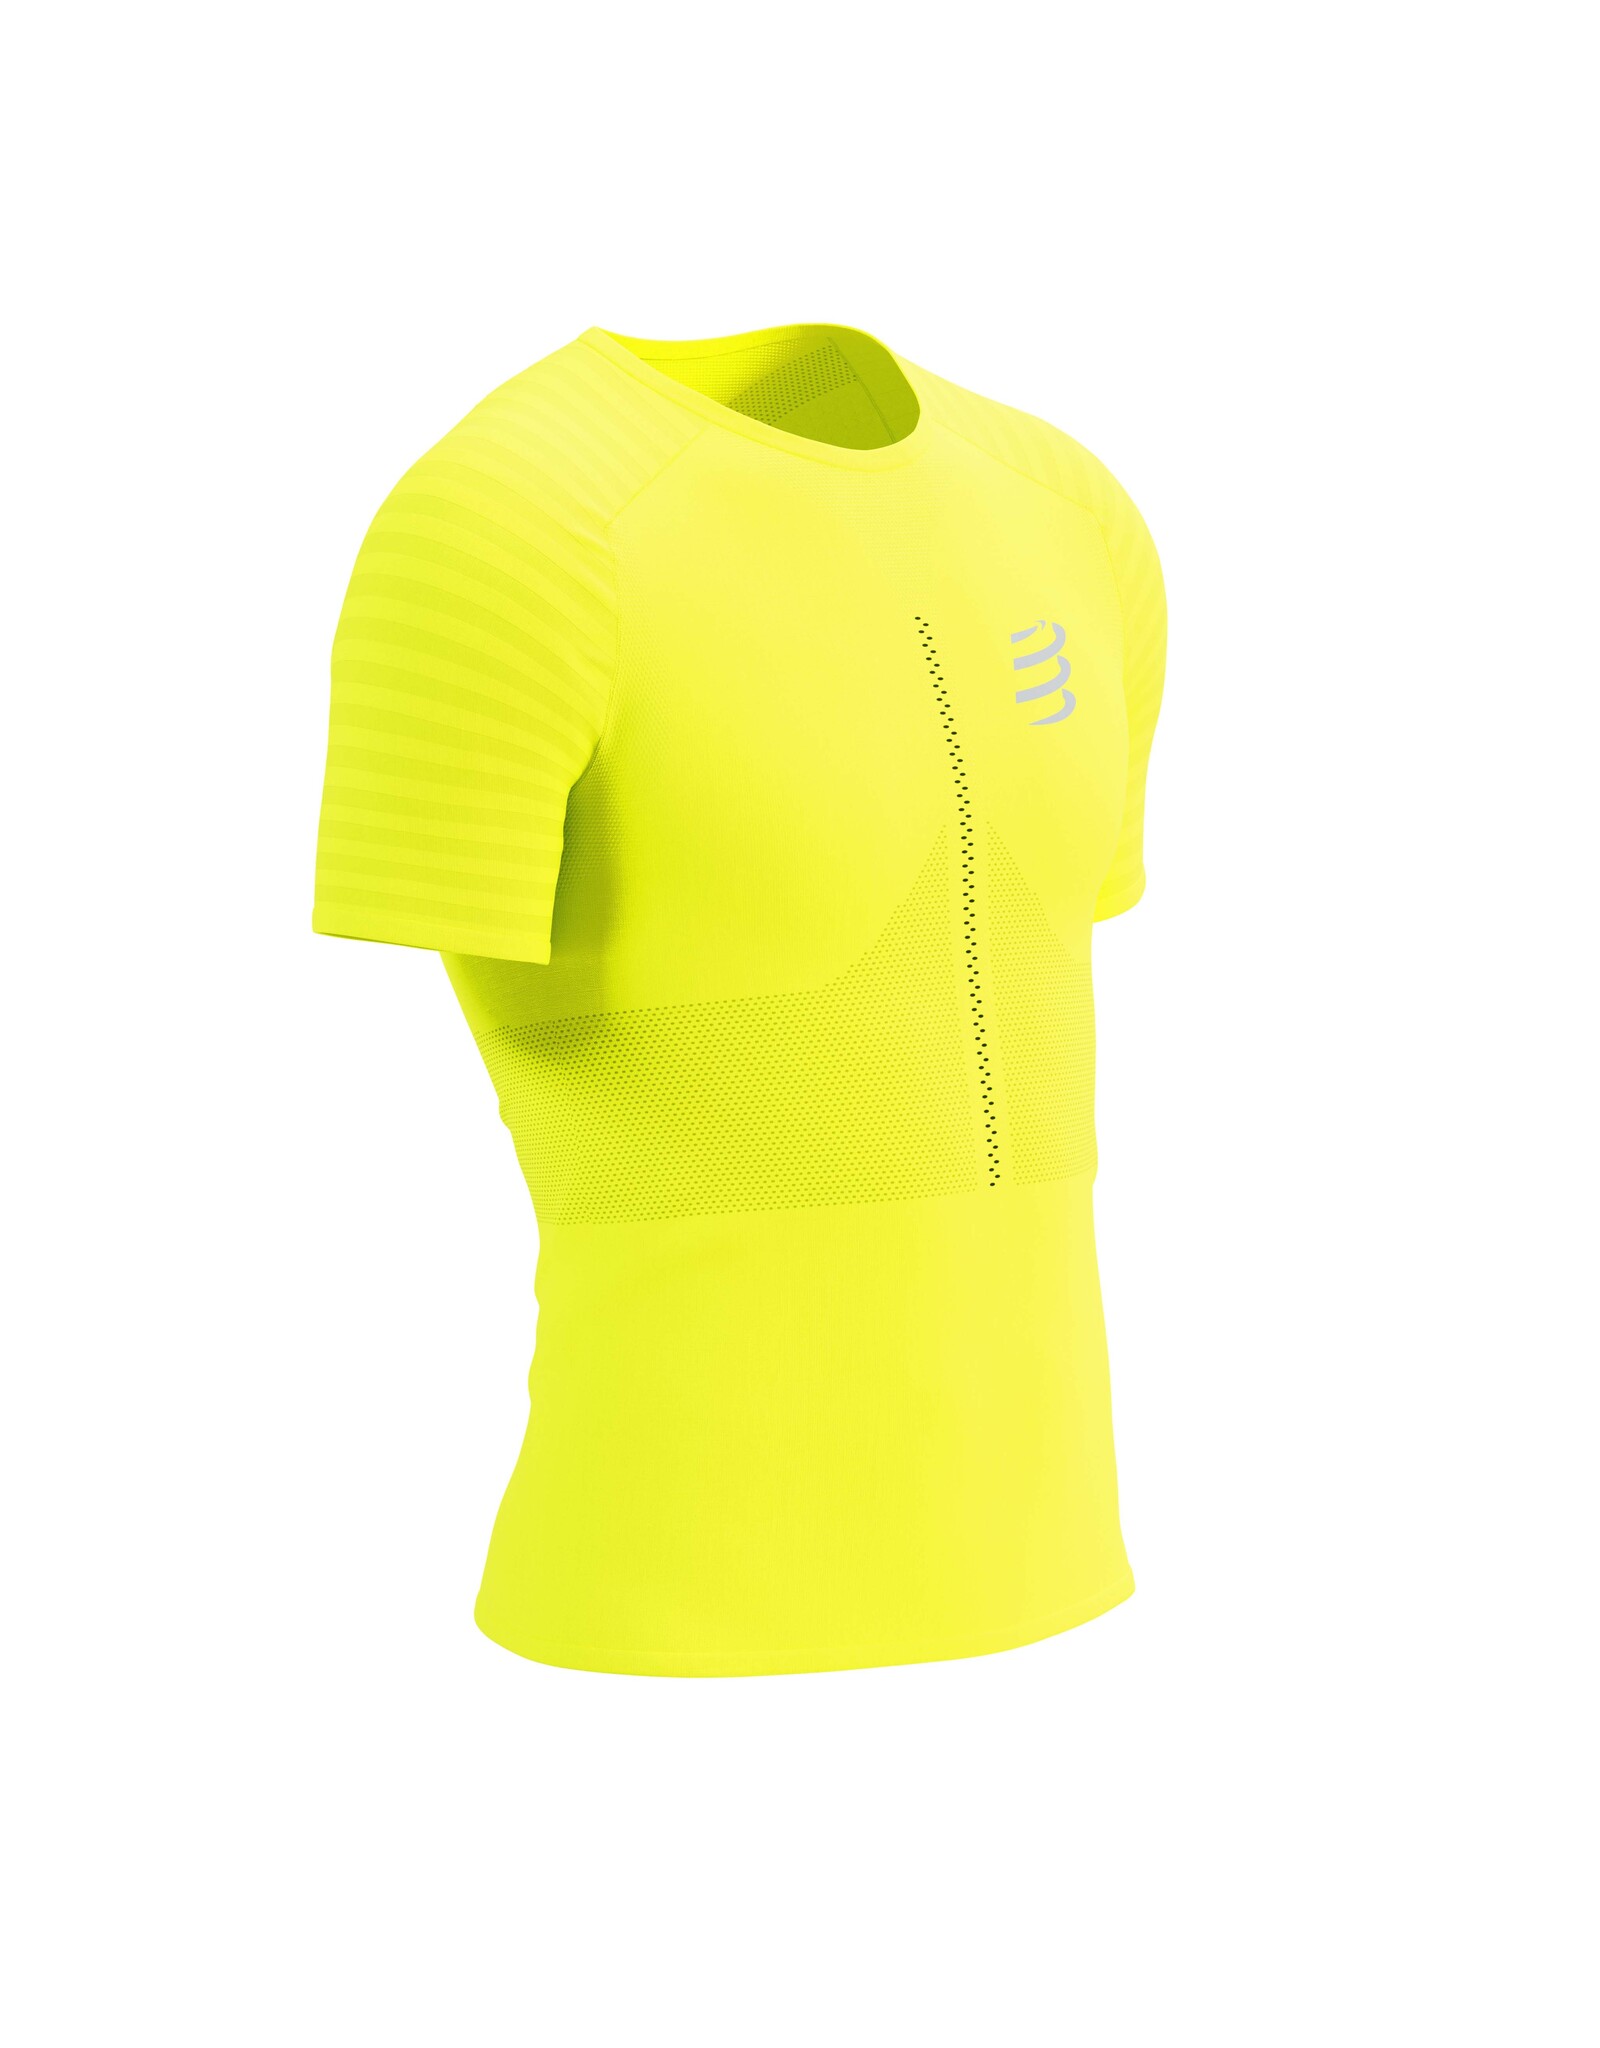 Compressport Racing SS Tshirt M - Safety Yellow/Silver Reflective